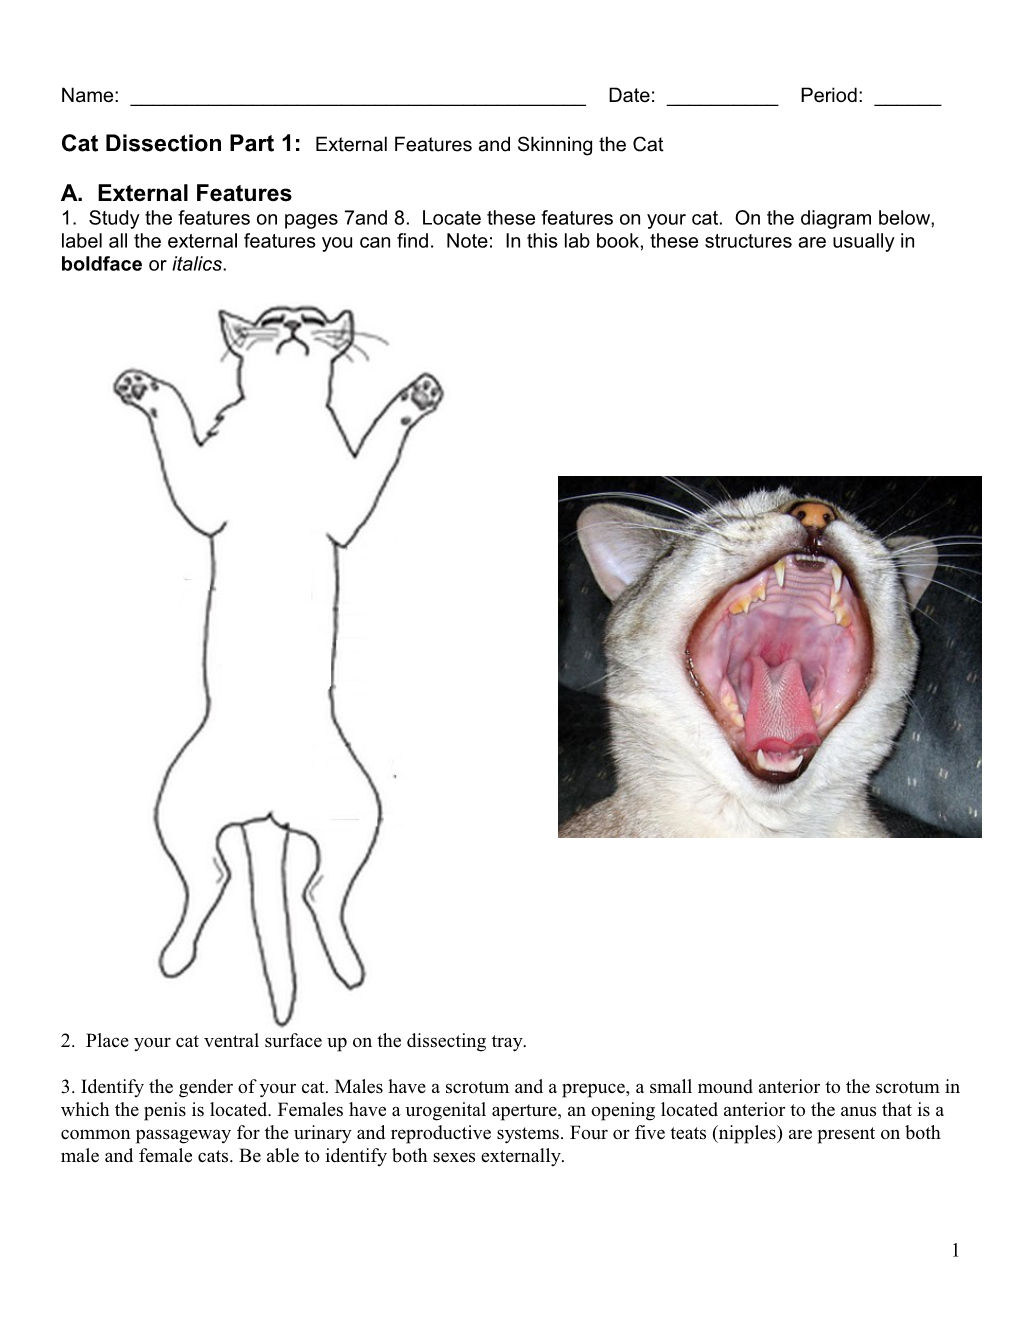 Cat Dissection Part 1: External Features and Skinning the Cat